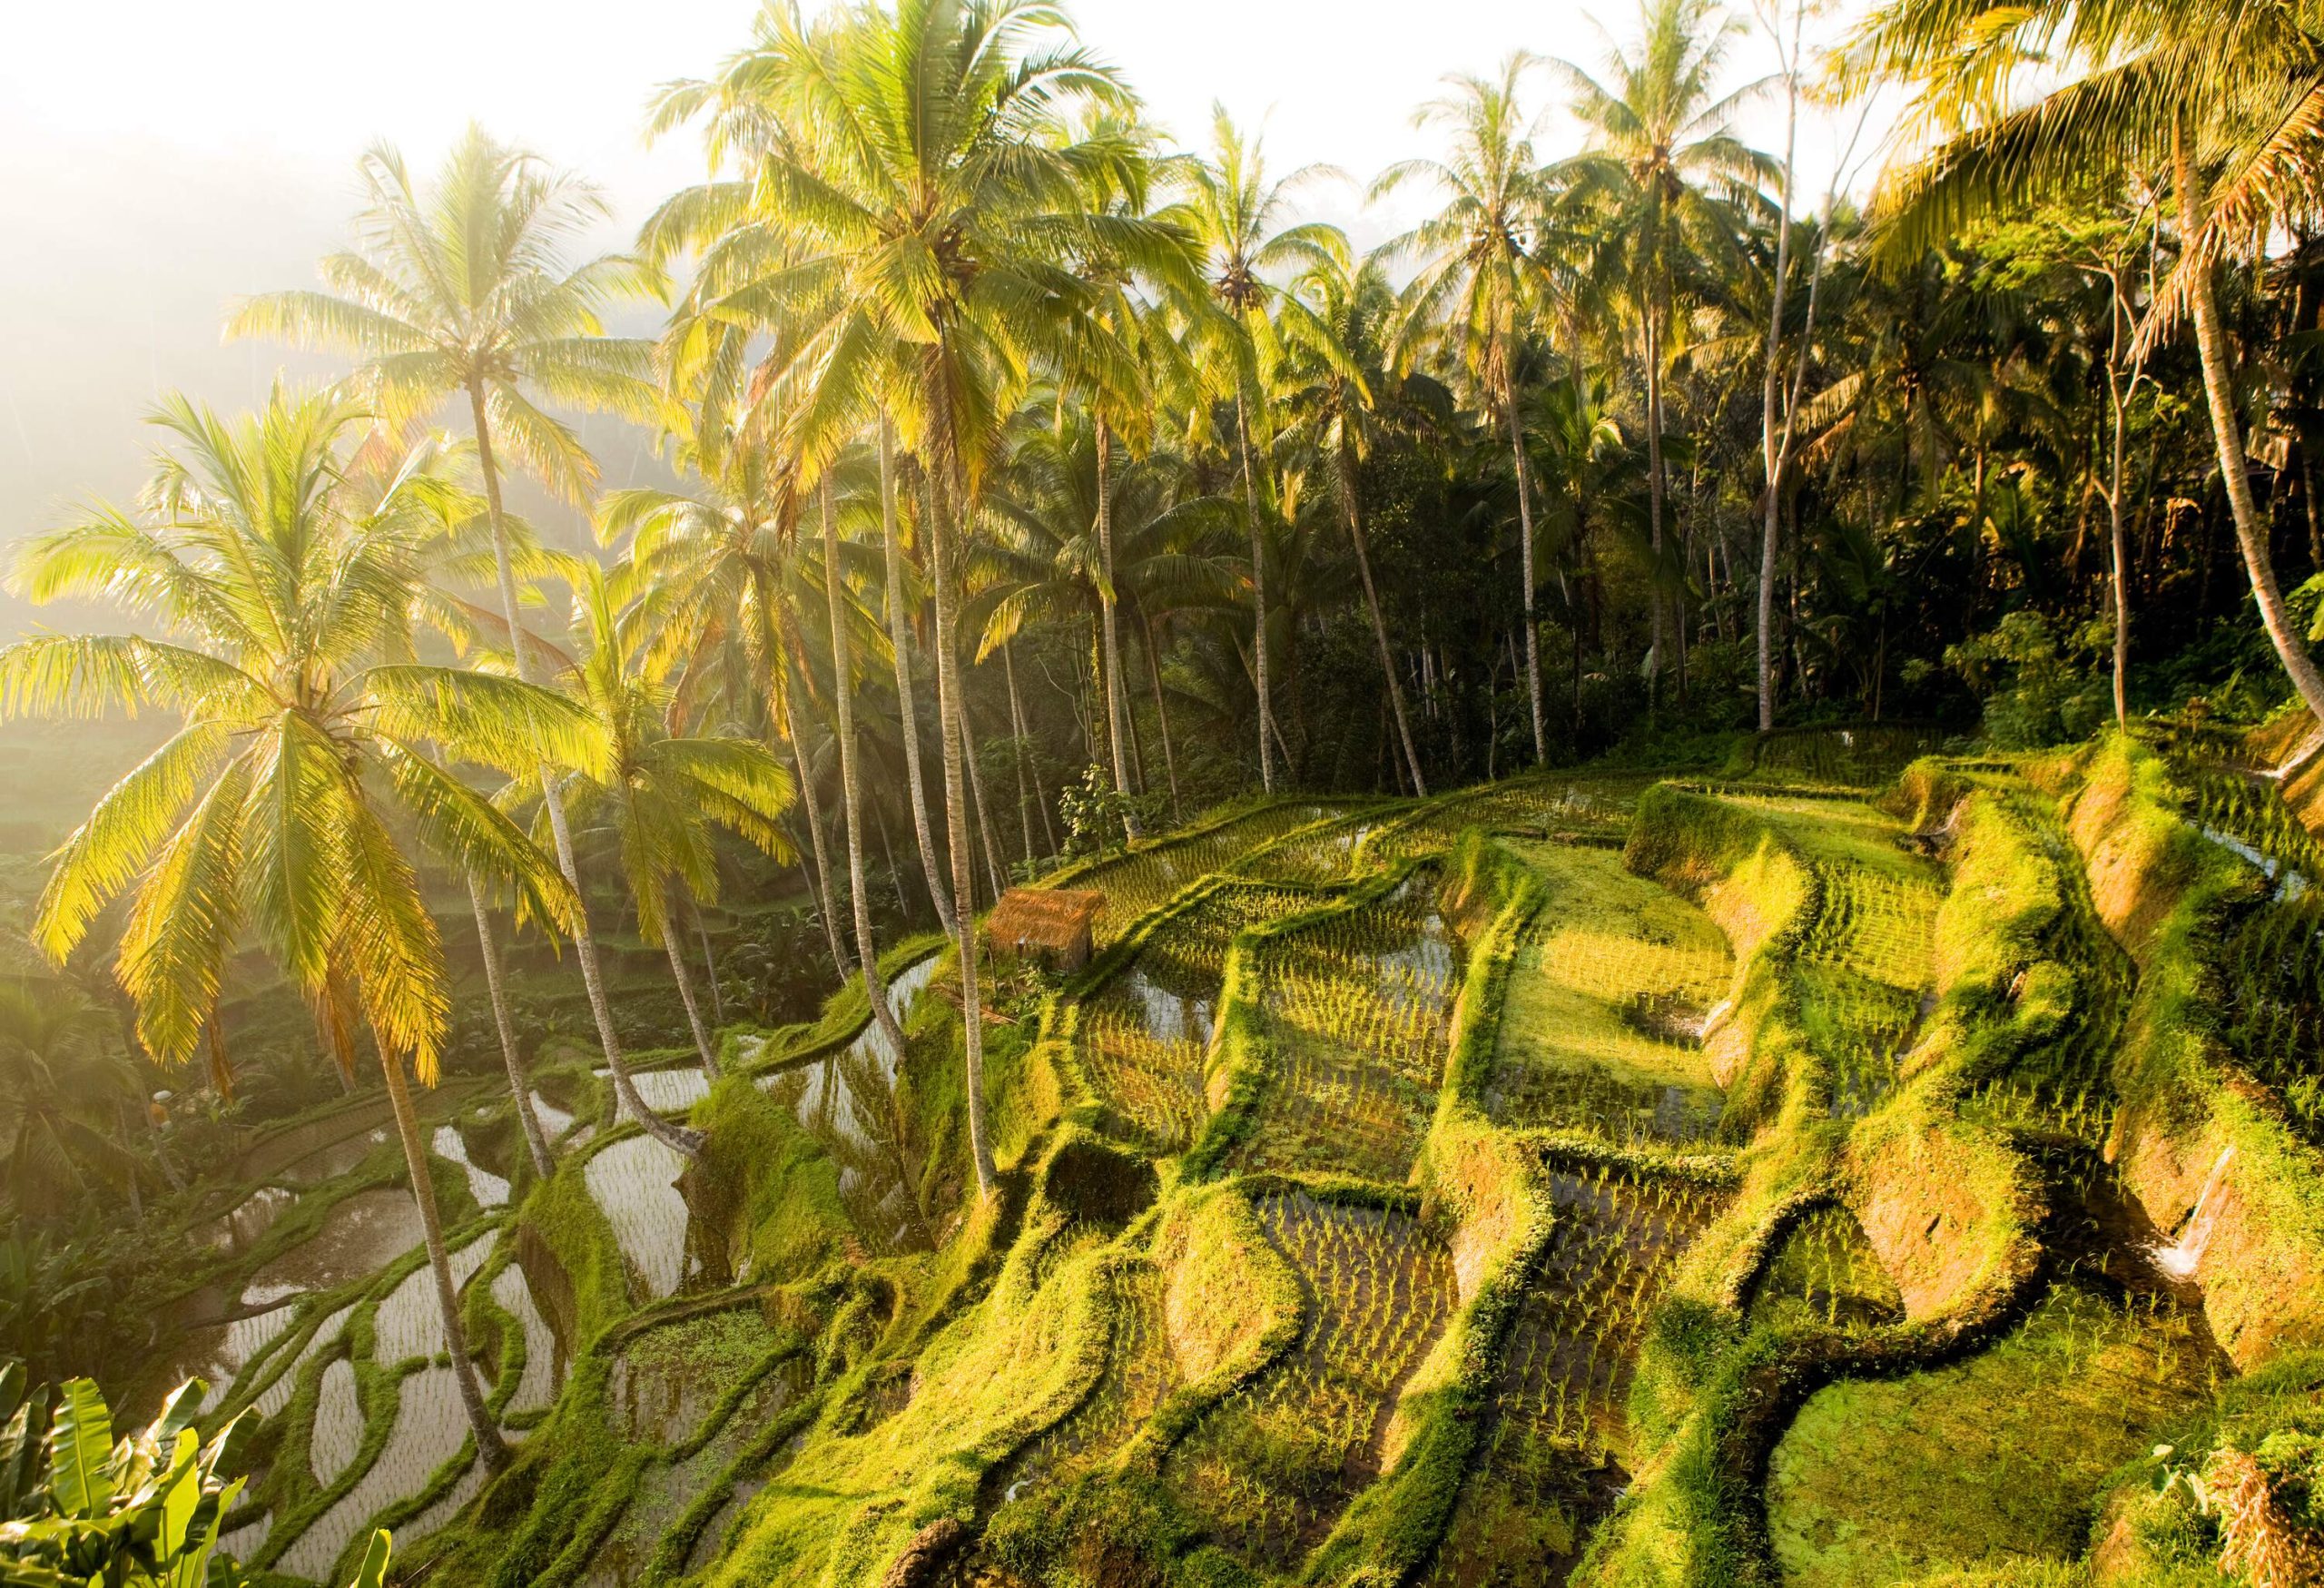 The sun shines through the rice terraces under the canopy of palm trees.